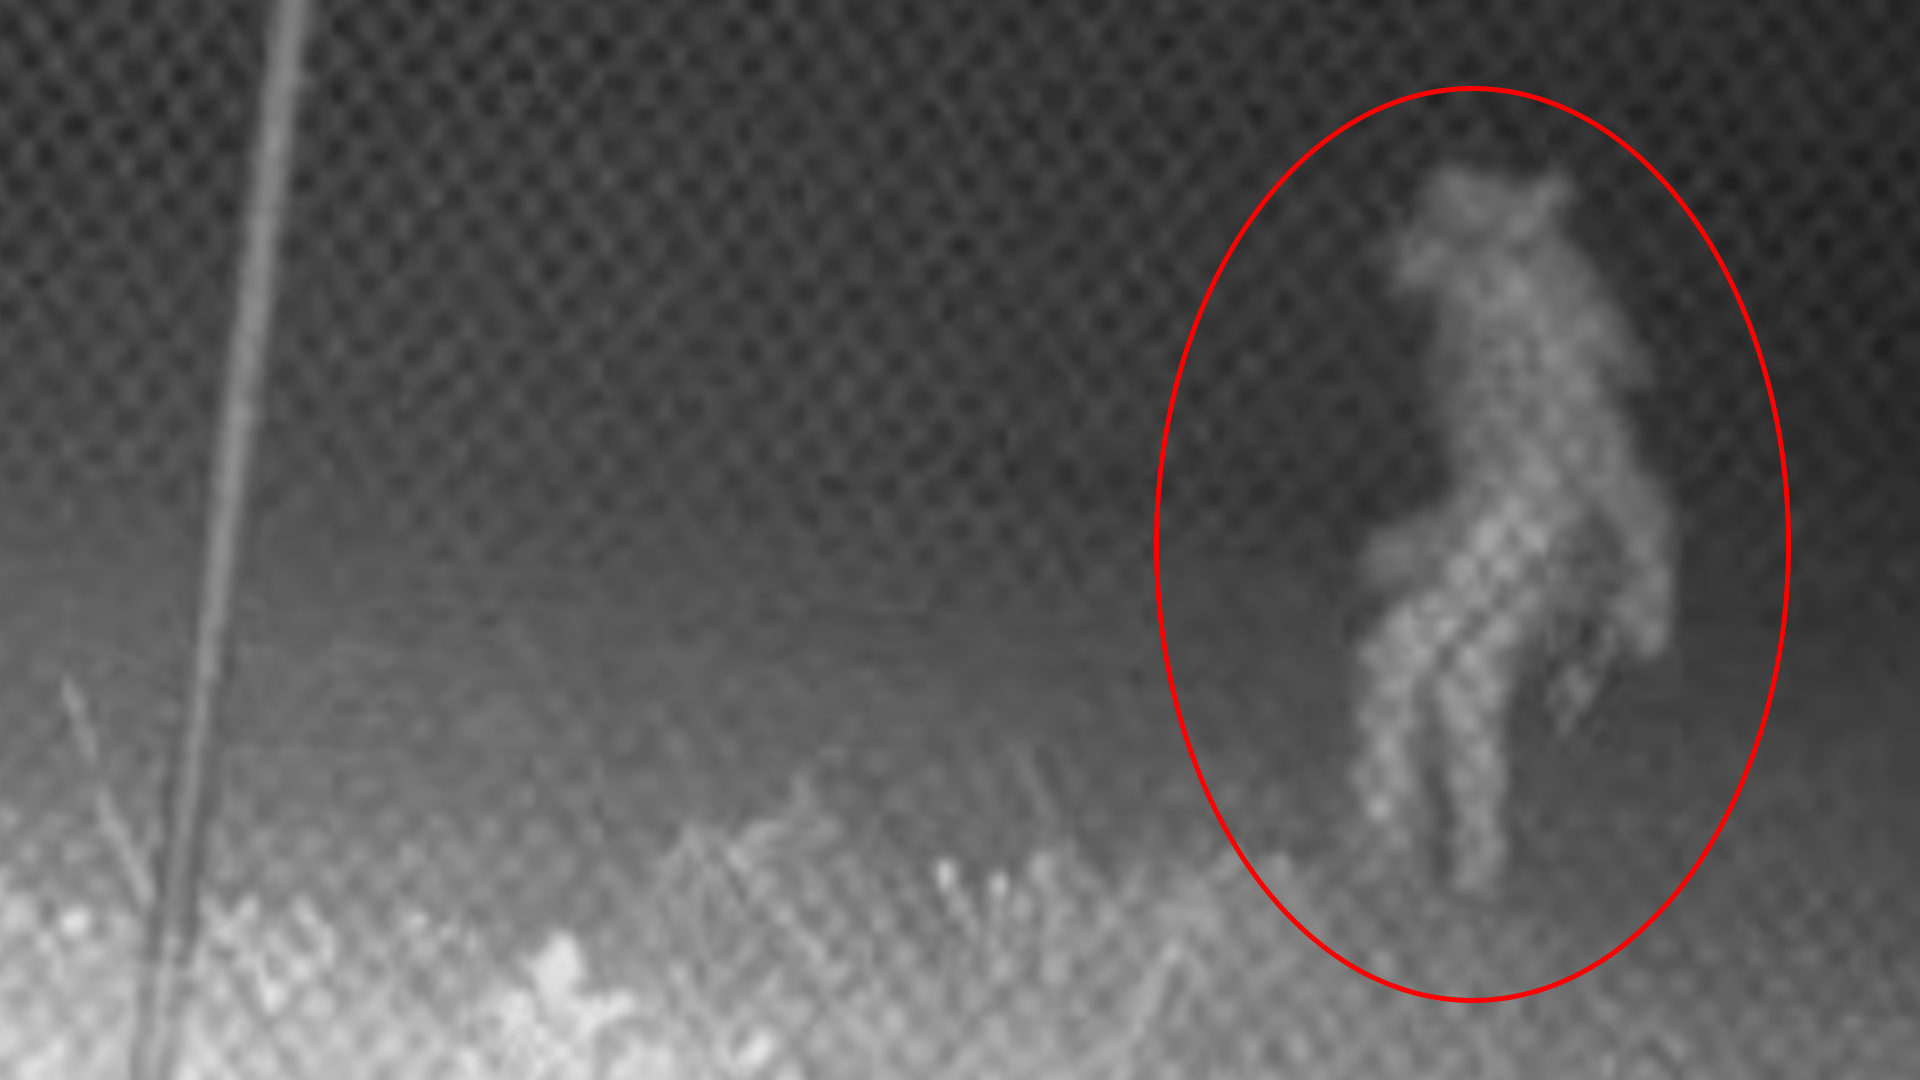 What Exactly Is This? ‘Unidentified Amarillo Object' Caught on
Camera at Zoo